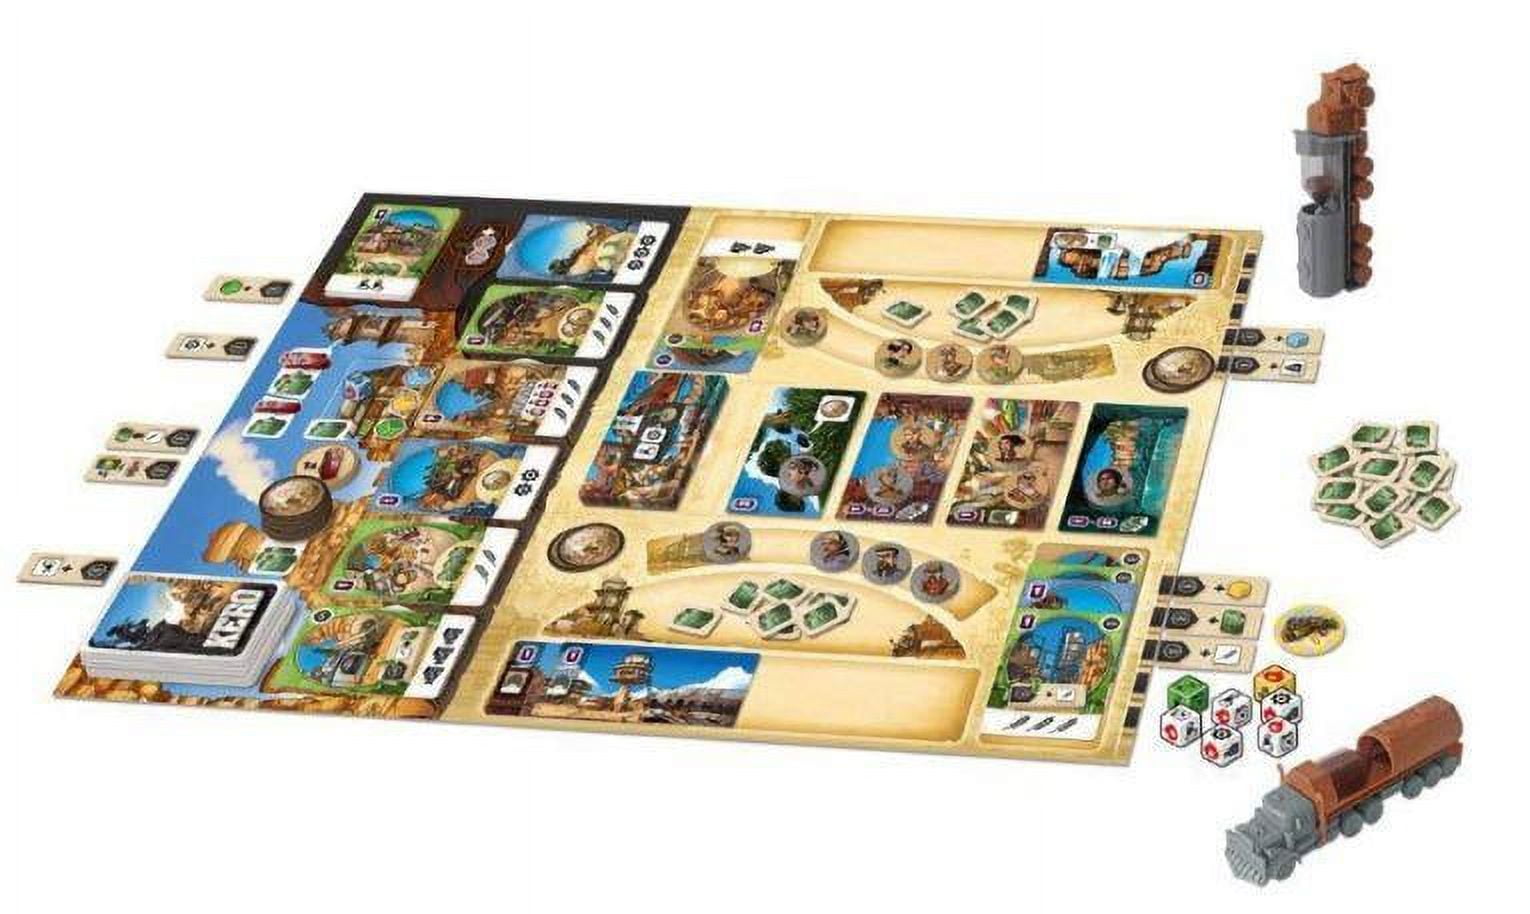  Fantasy Flight Games Kero Board Game, Apocalyptic Survival Game, Strategy Game for Adults and Kids, Ages 8 and up, 2 Players, Average  Playtime 30 Minutes